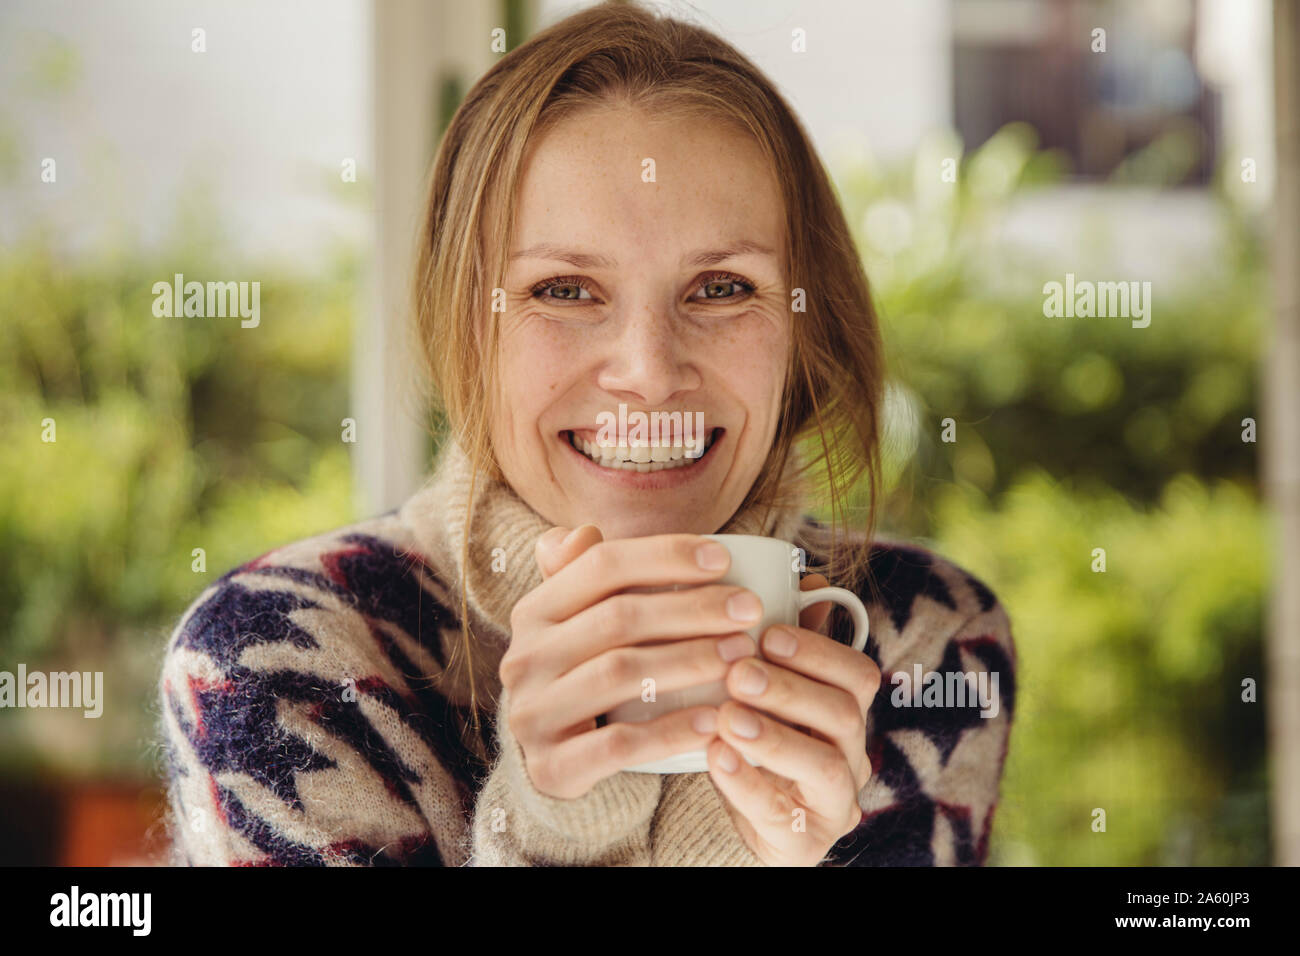 Portrait of smiling young woman holding a cup pull moelleux Banque D'Images